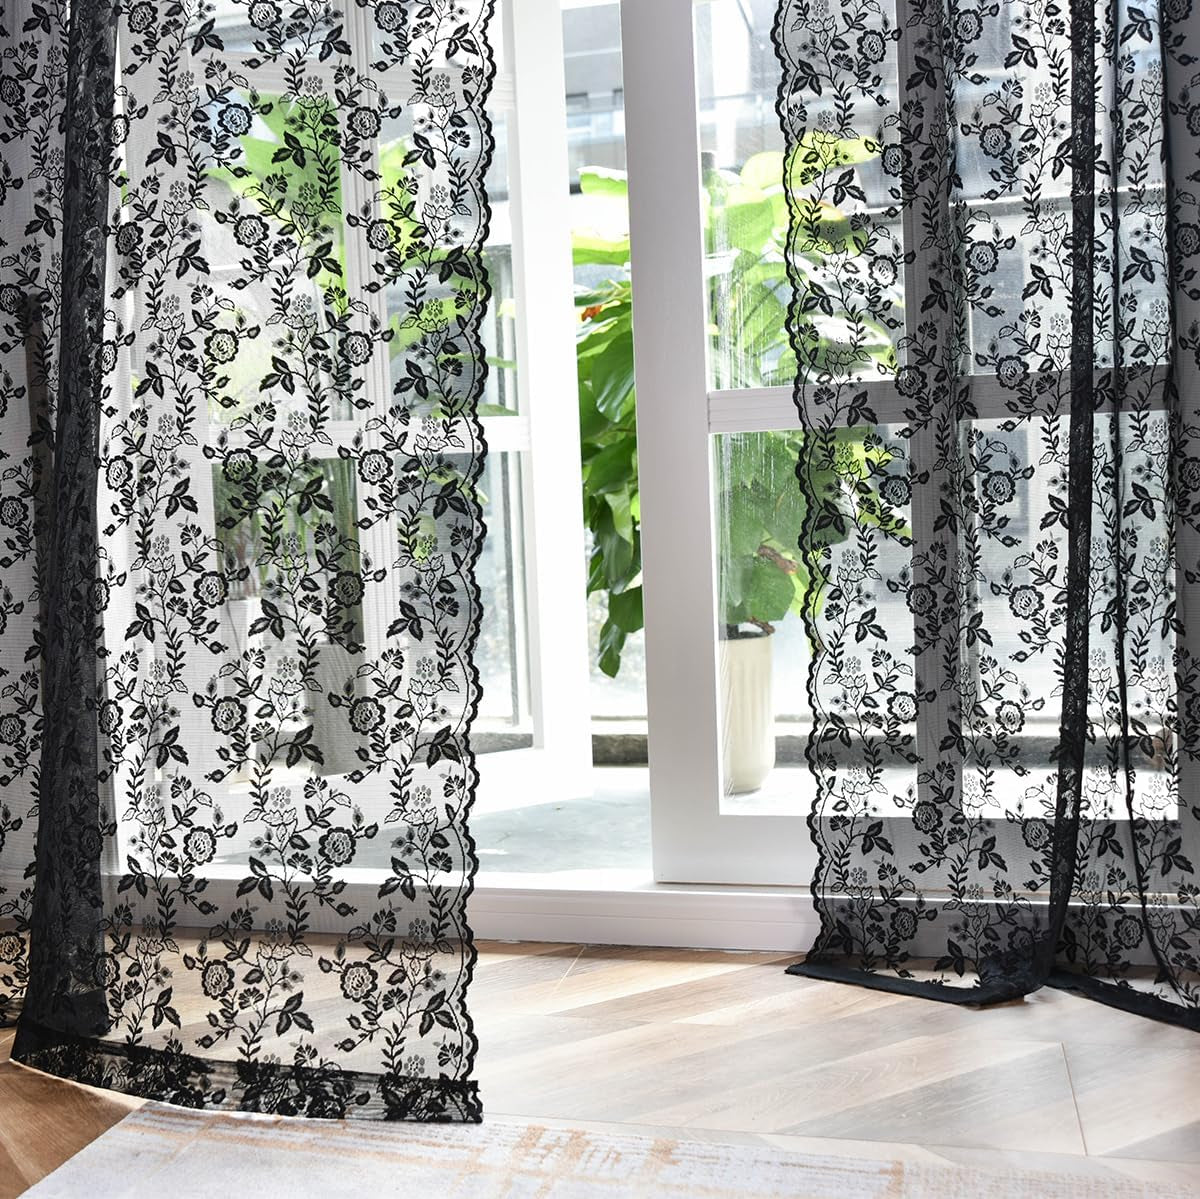 FINECITY Lace Curtains Country Rustic Floral Sheer Curtains for Living Room 72 Inch Length Drapes Vintage Floral Pattern Farmhouse Privacy Light Filtering Sheer Curtain 2 Panels, 52 X 72 Inch, Grey  Keyu Textile Black W52 X L63 Inch 